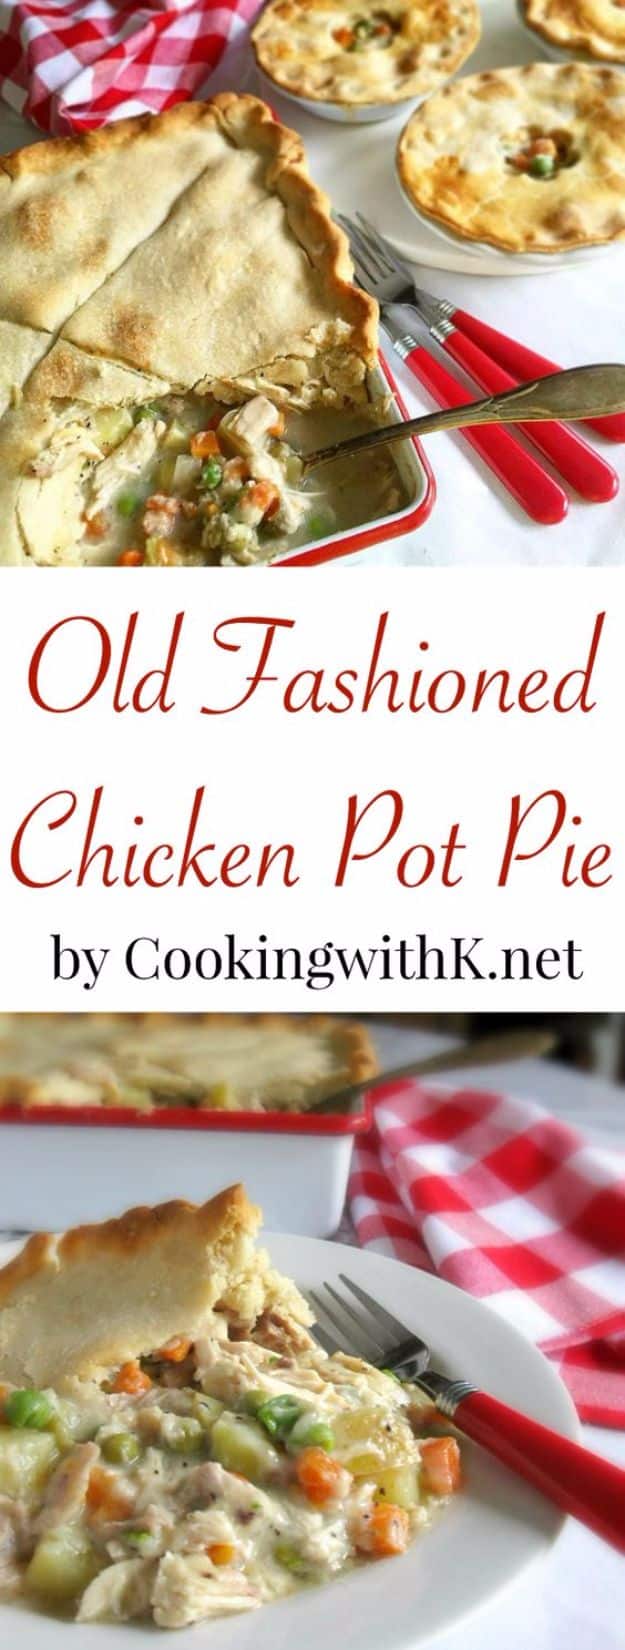 Best Country Cooking Recipes - Old Fashioned Chicken Pot Pie - Easy Recipes for Country Food Like Chicken Fried Steak, Fried Green Tomatoes, Southern Gravy, Breads and Biscuits, Casseroles and More - Breakfast, Lunch and Dinner Recipe Ideas for Families and Feeding A Crowd - Step by Step Instructions for Making Homestyle Dips, Snacks, Desserts #recipes